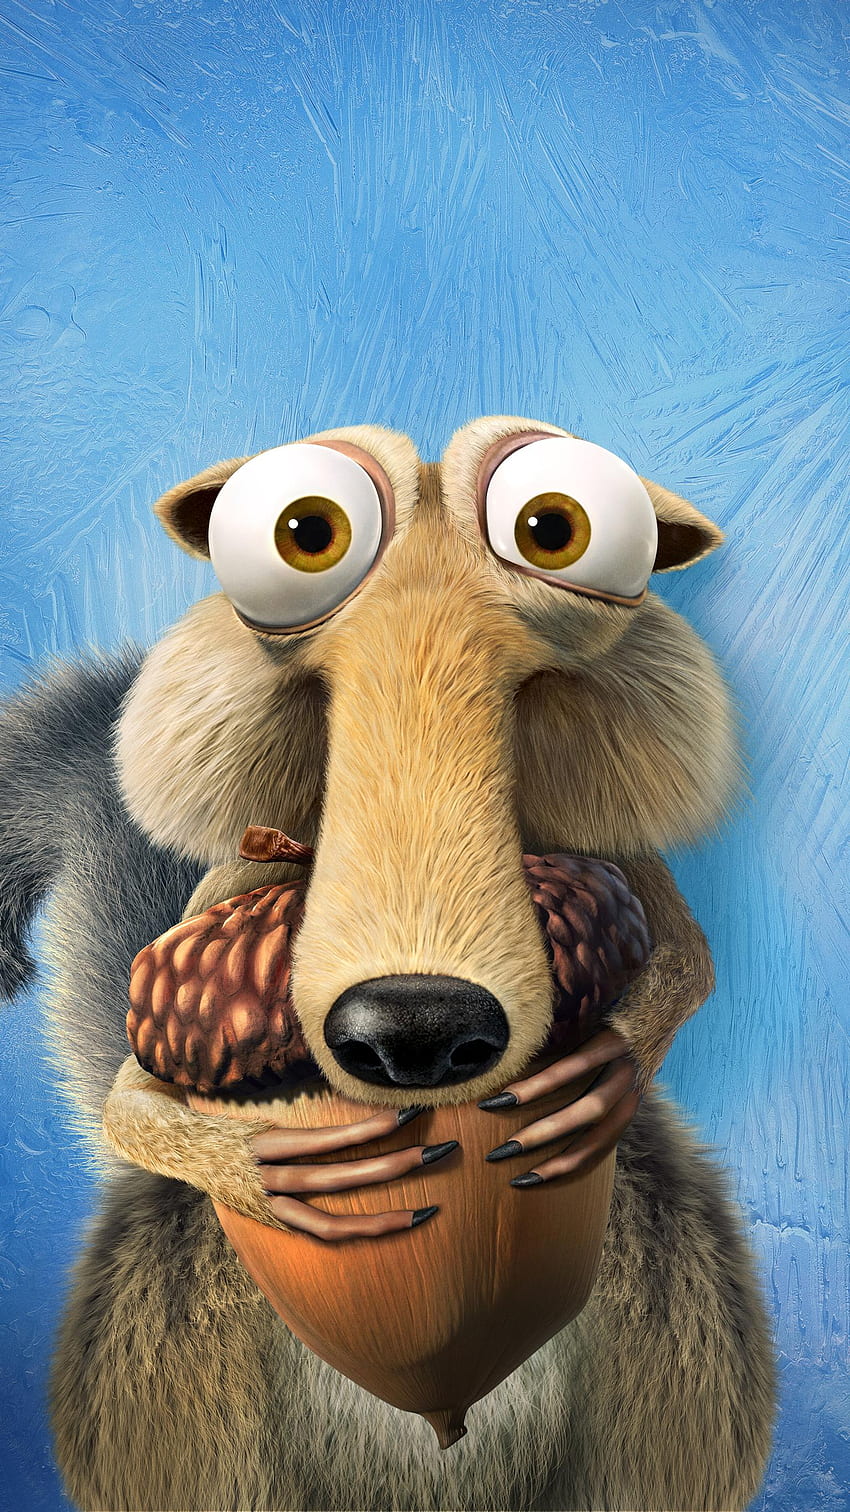 Ice Age: Collision Course (2022) movie HD phone wallpaper